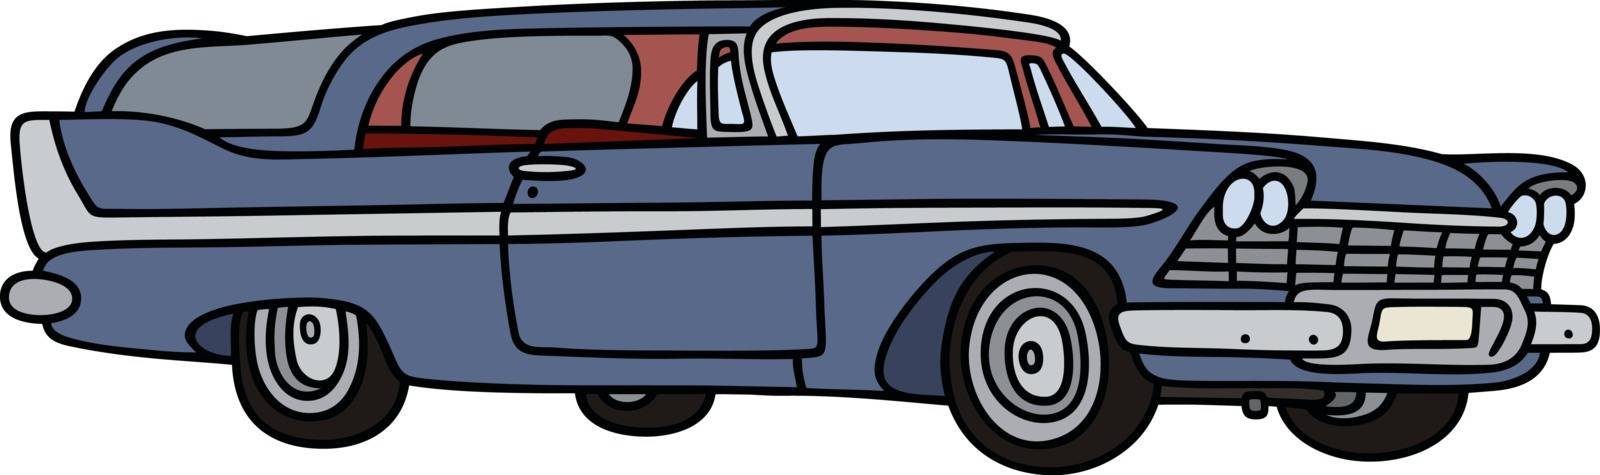 Classic station wagon by vostal